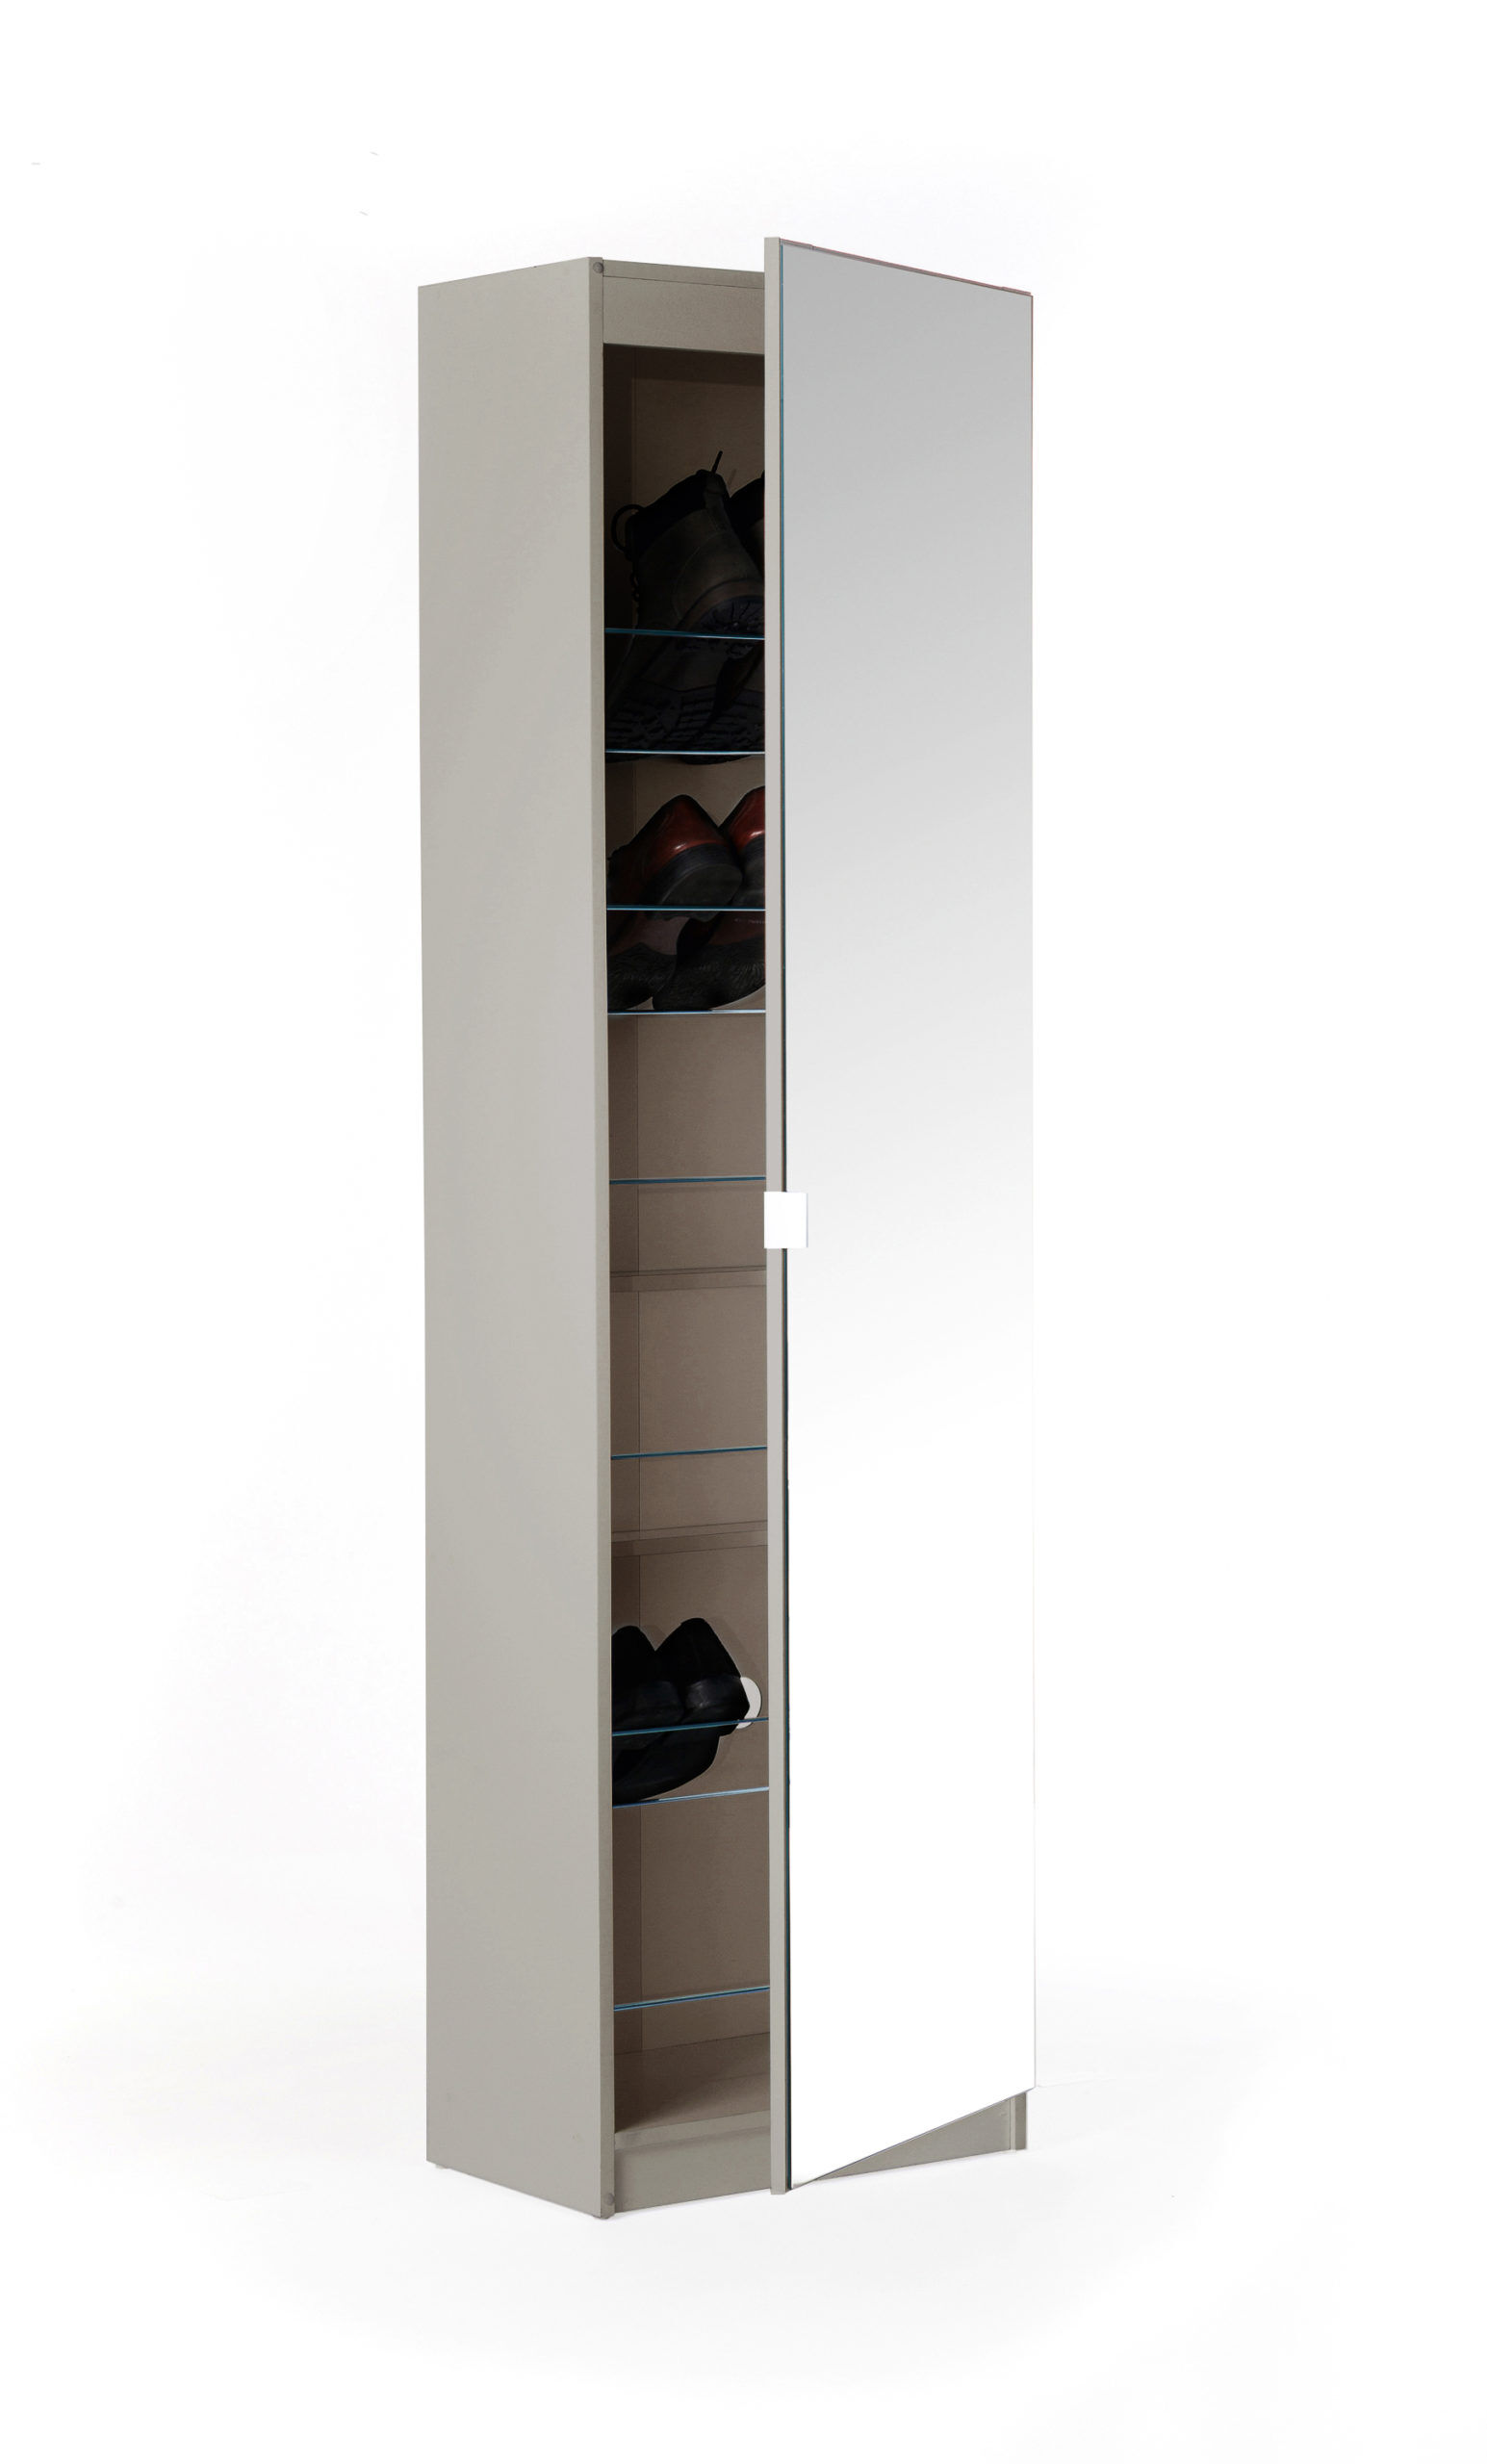 Bohemian 180cm Mirrored Shoe Cabinet   Grey   Self Assembly